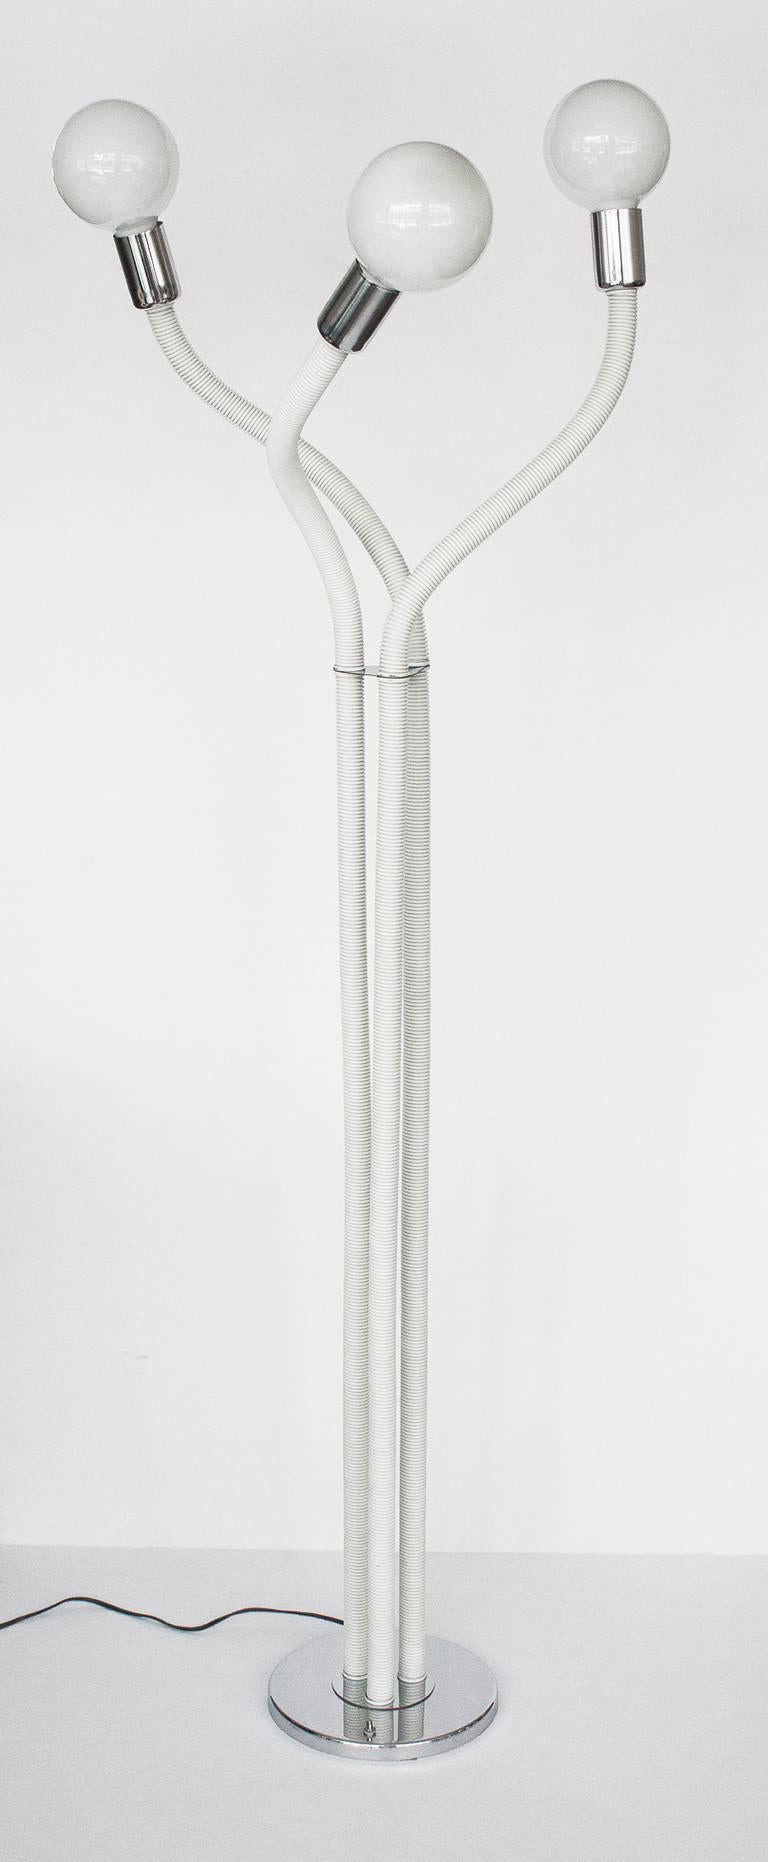 This unique floor lamp is comprised of three flexible arms that can be arranged and configured creating a playful effect. Unlimited possibilities! Each arm ends with an exposed light bulb and chrome socket. Sculptural free-form floor lamp in the